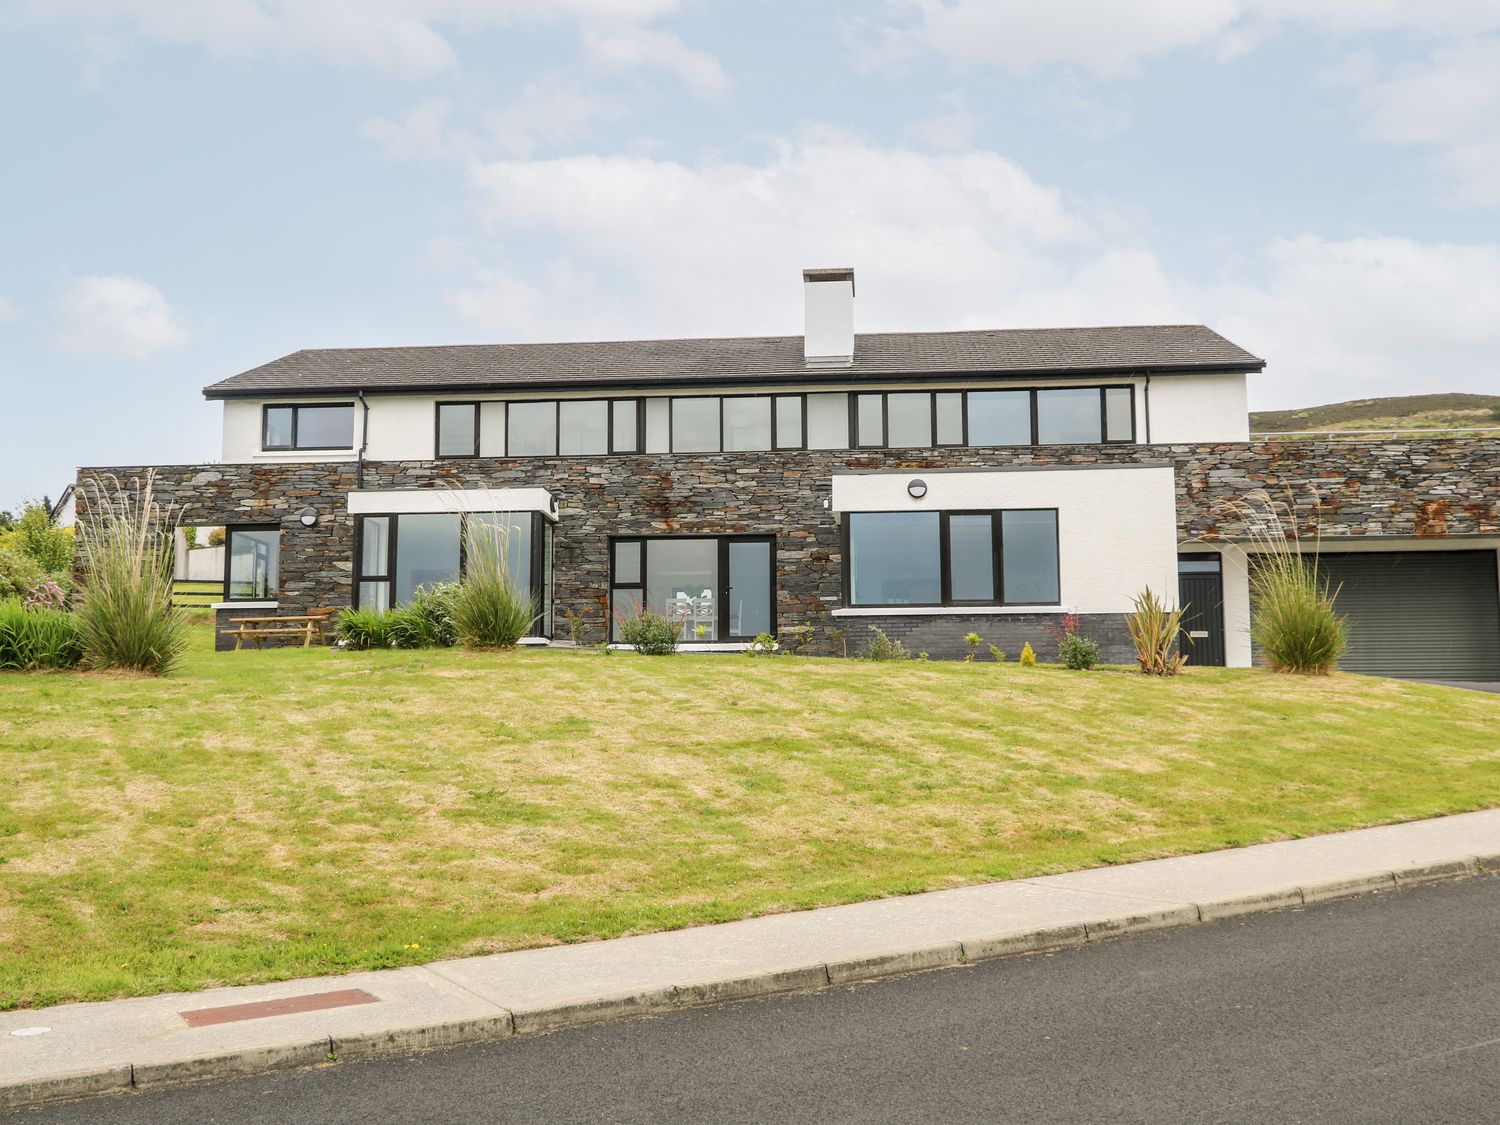 5 Harbour View - County Donegal - 1066790 - photo 1